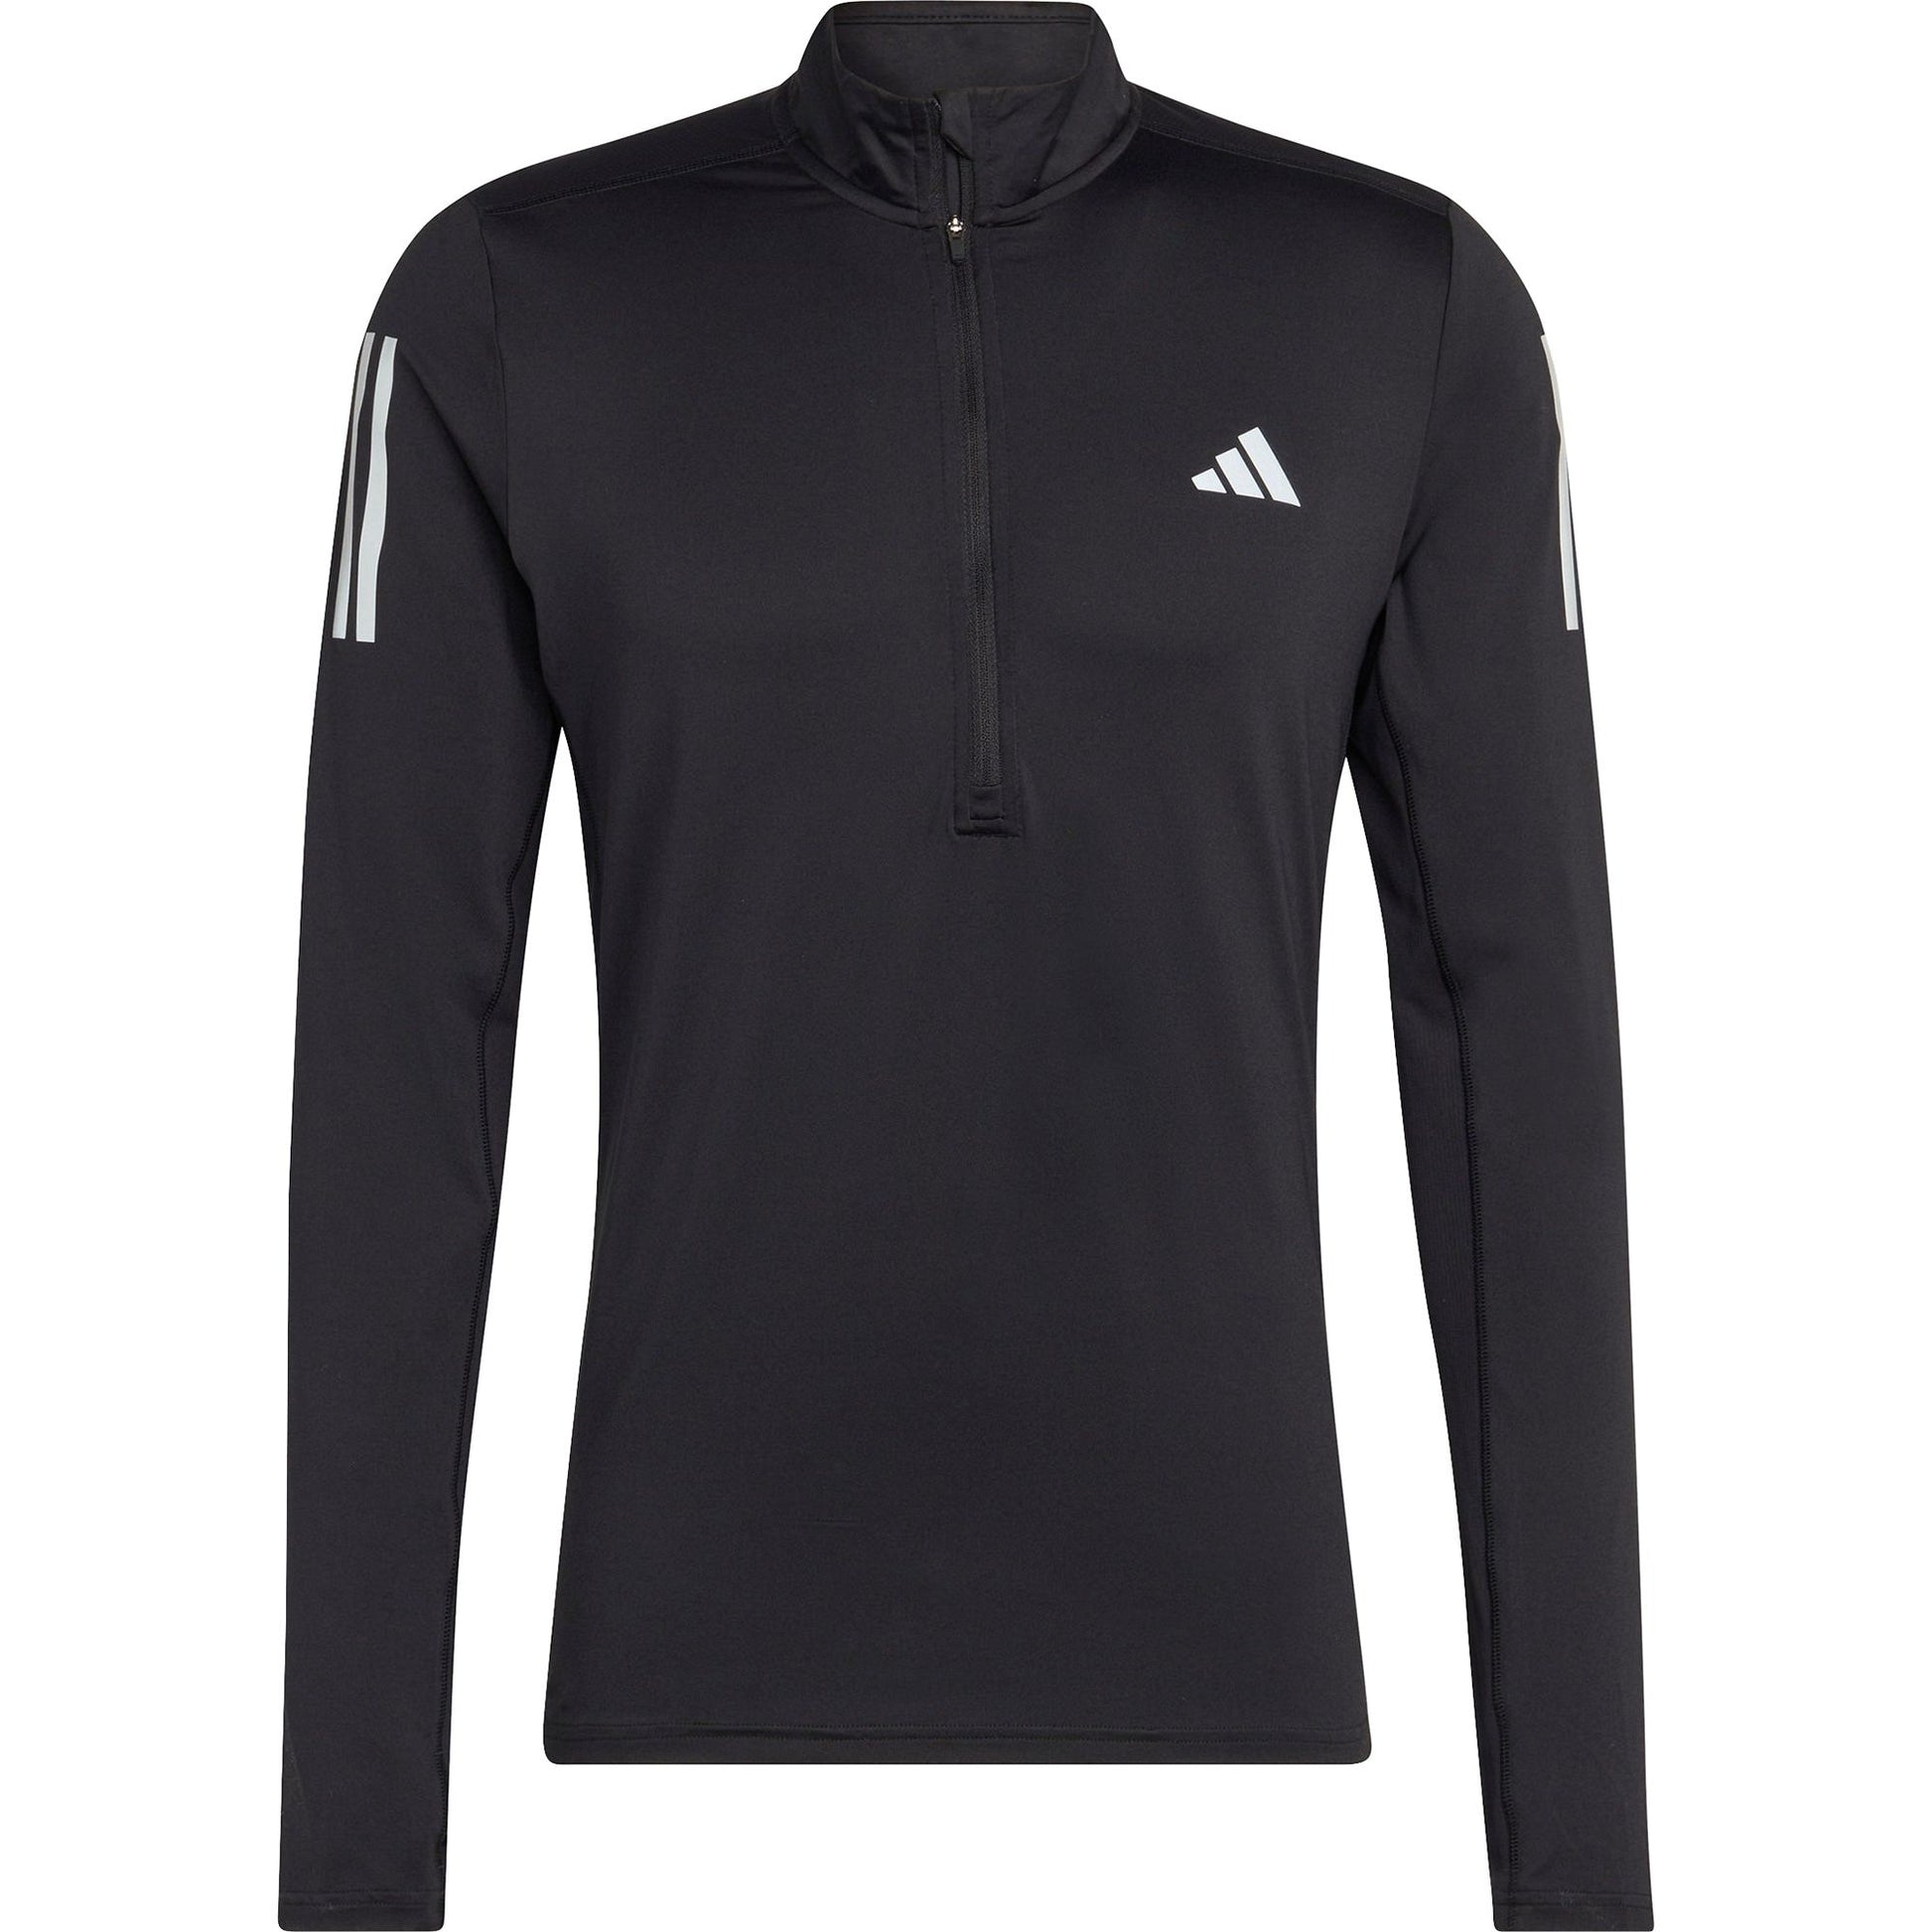 Adidas Own The Run Half Zip Long Sleeve Ik9562 Front - Front View